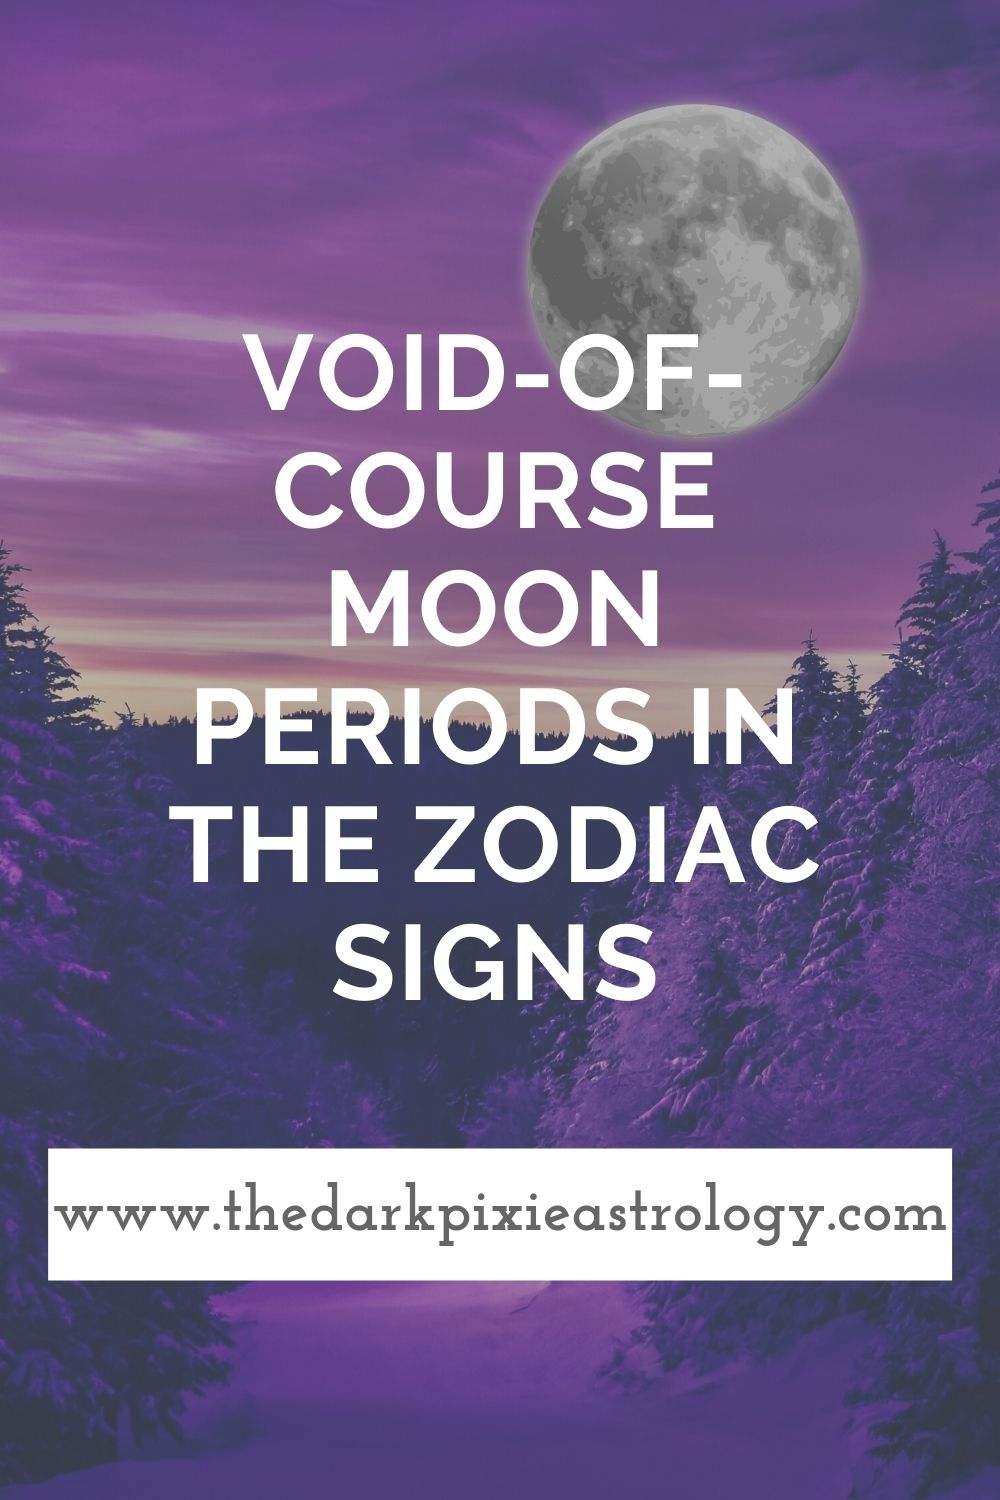 Void-of-Course Moon Periods in the Zodiac Signs - The Dark Pixie Astrology